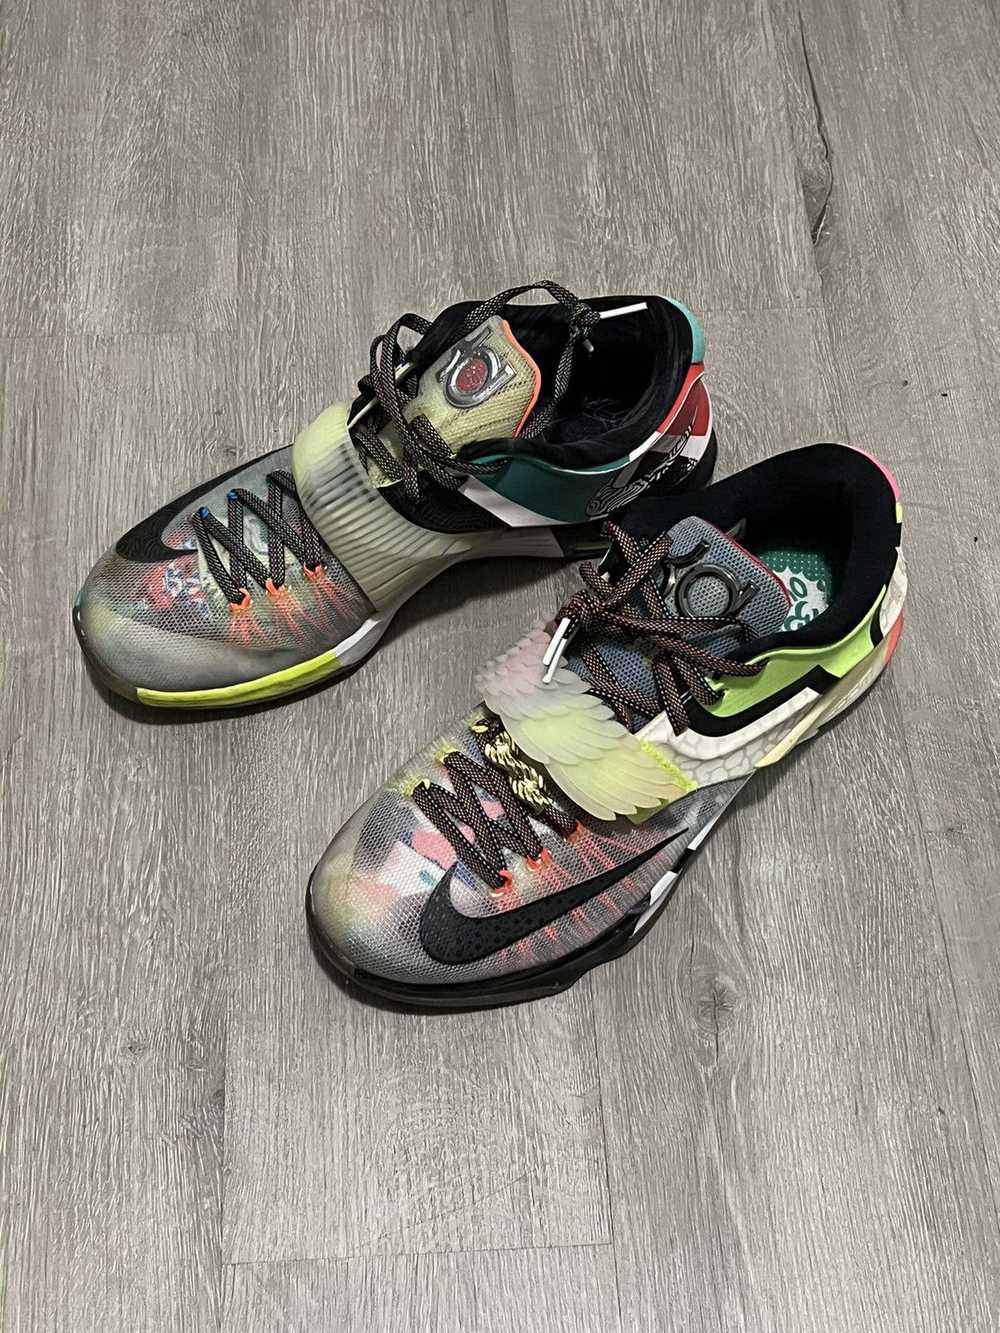 Nike KD 7 What The - image 12